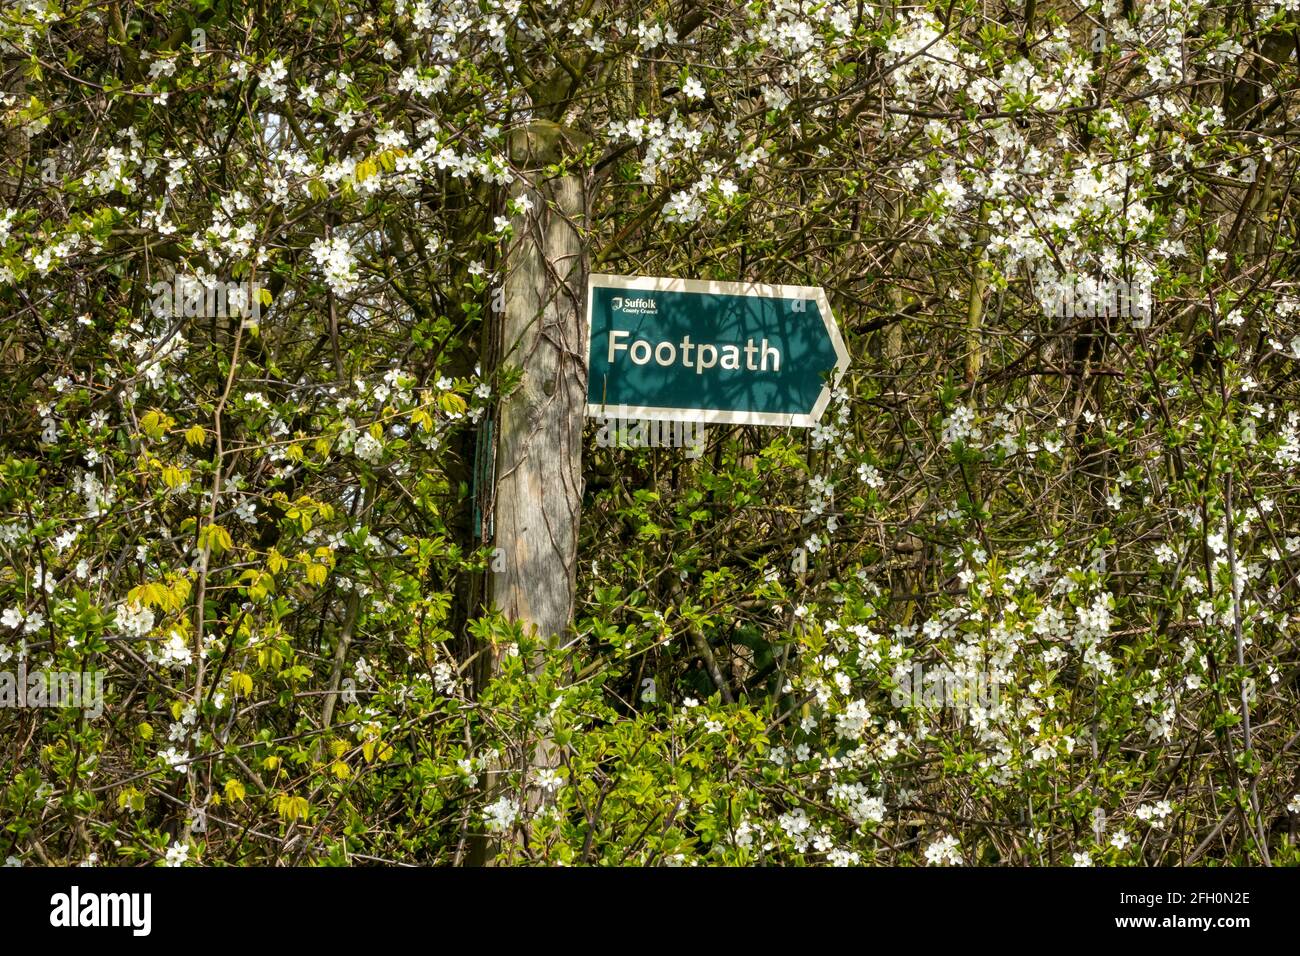 Footpath sign with directional pointer partly obscured by undergrowth in a rural location Stock Photo